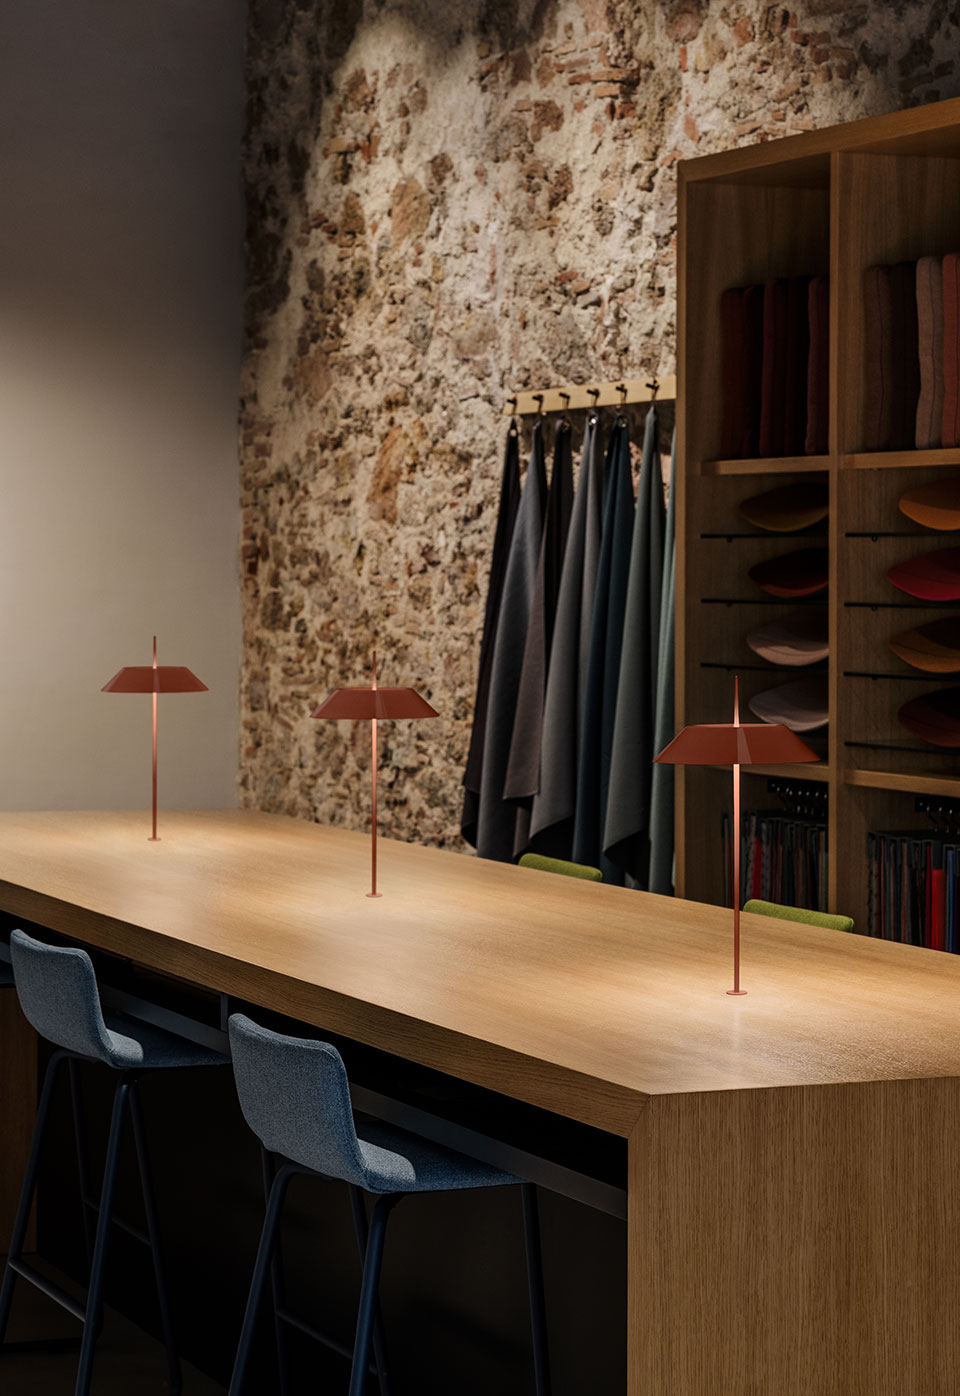 Vibia The Edit - Mayfair Mini. Lighting for precise accentuation